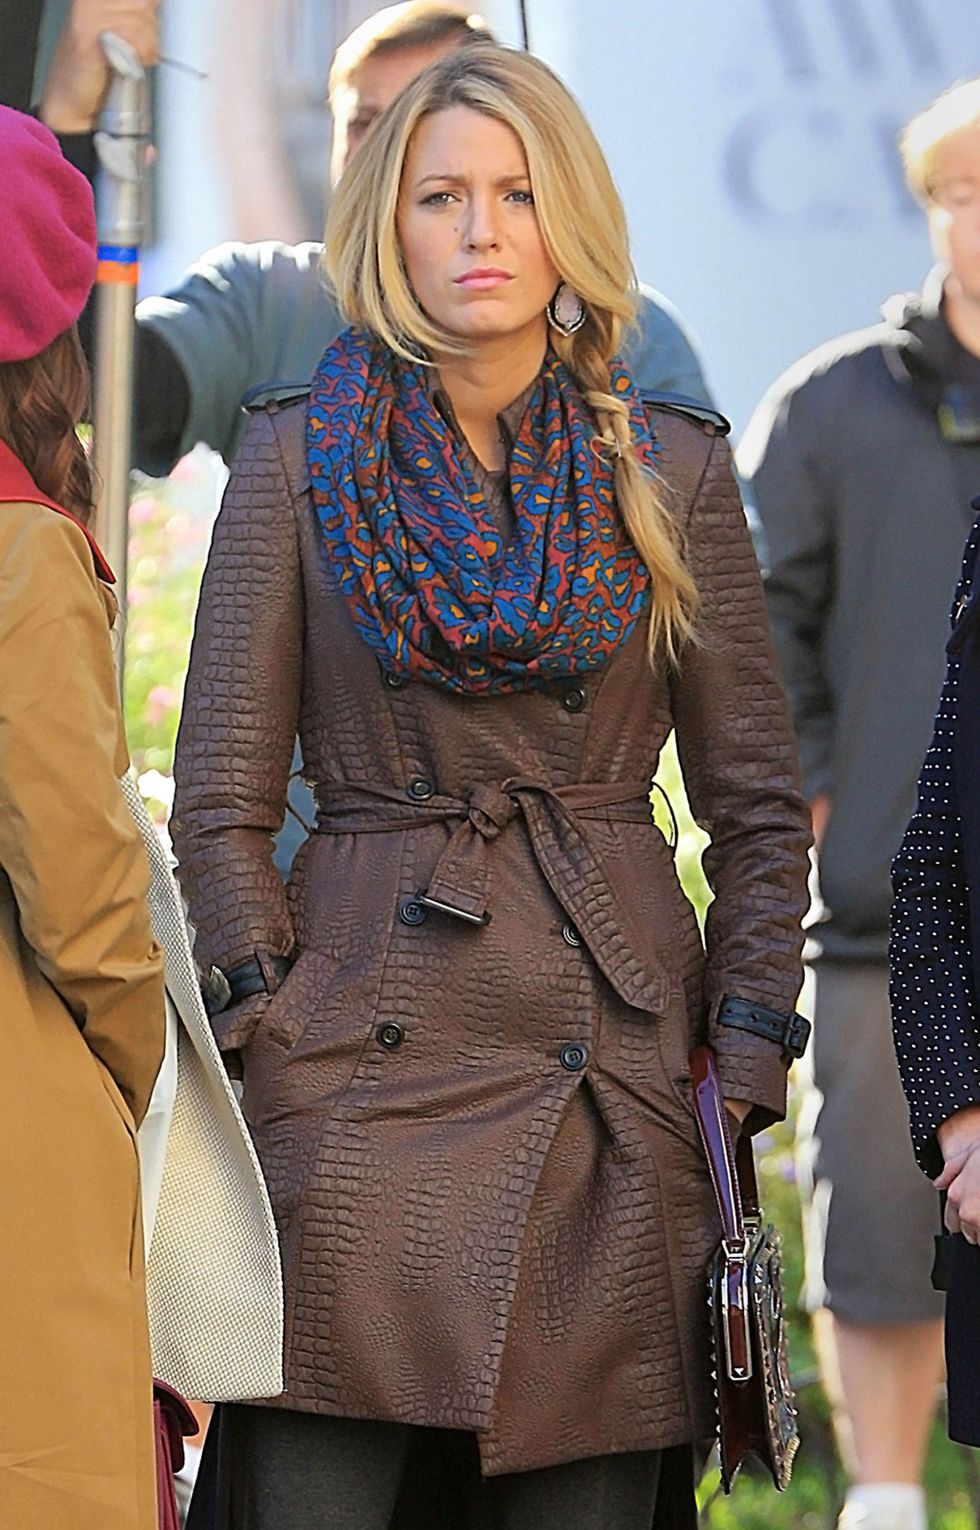 NEW YORK, NY - OCTOBER 01:  Blake Lively as seen on the set of "Gossip Girl" on October 1, 2012 in New York City.  (Photo by Jackson Lee/Star Max/FilmMagic)